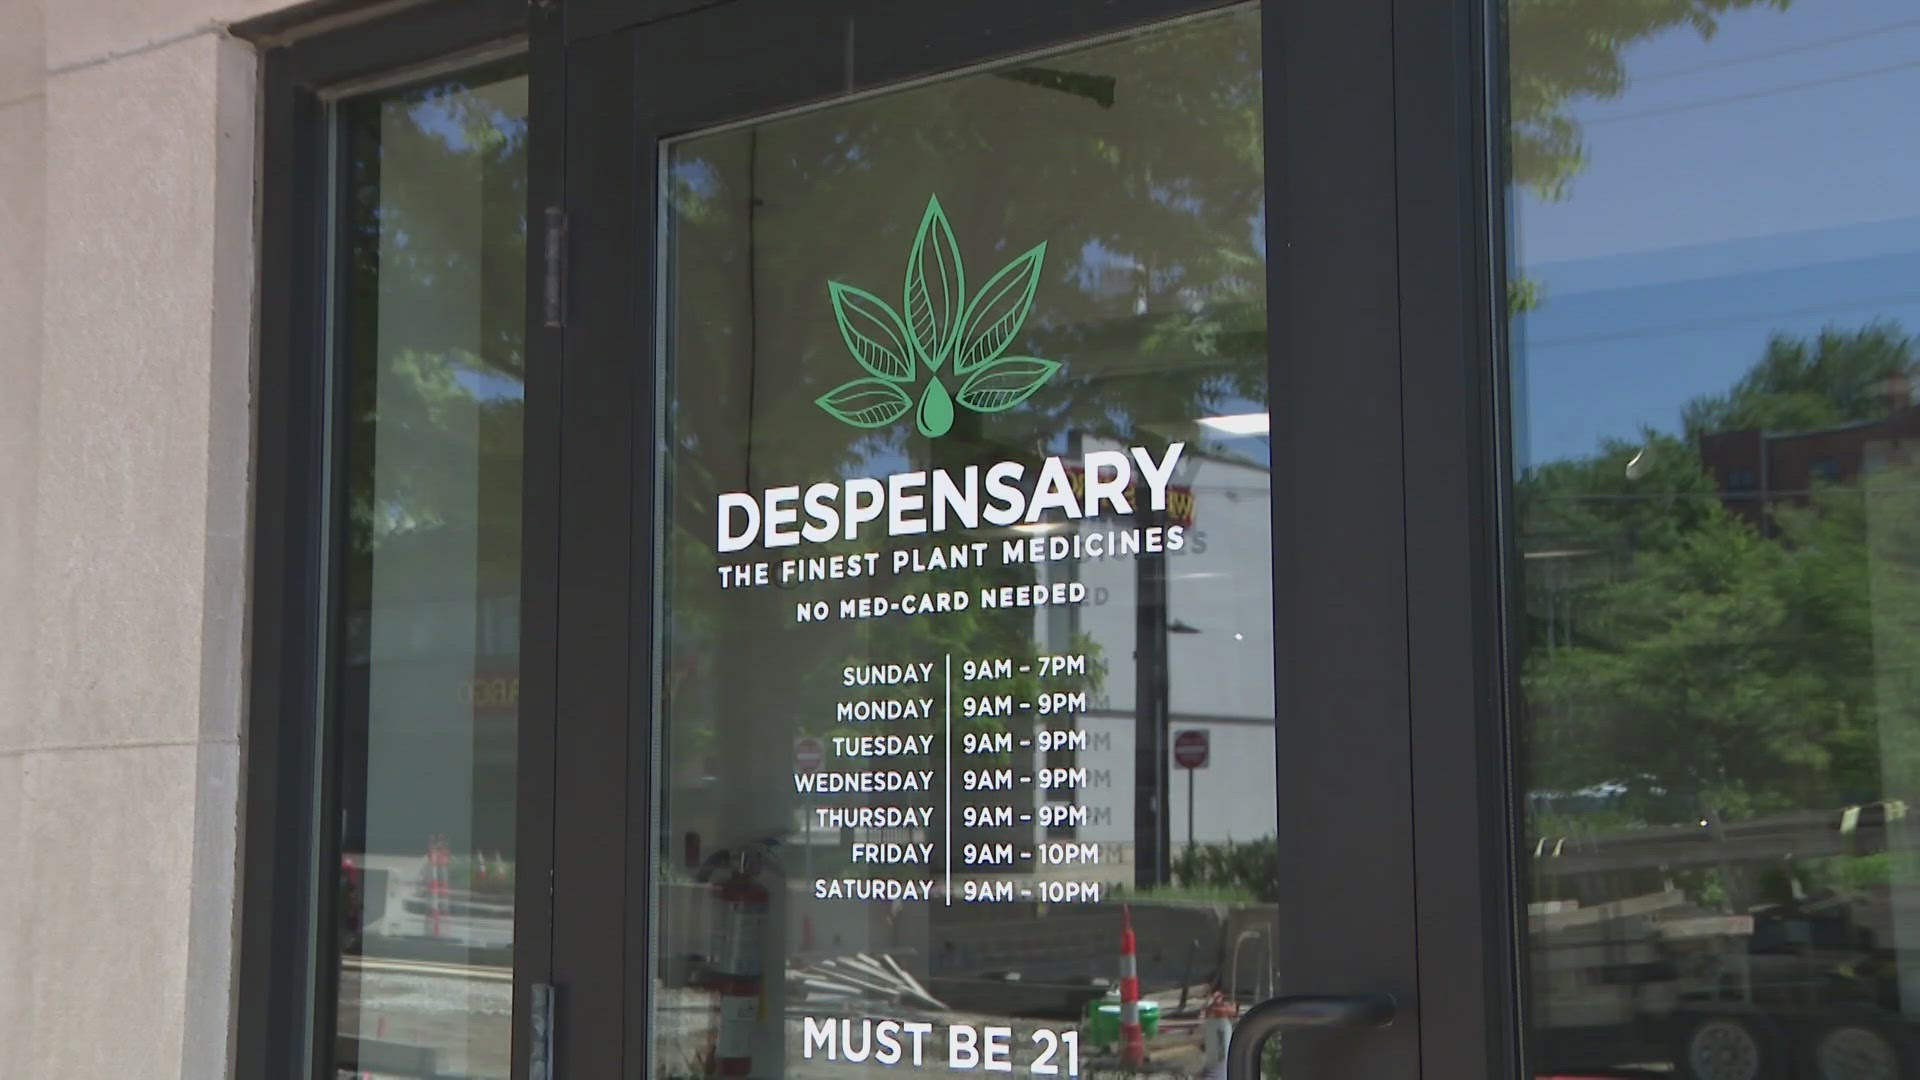 Business owners told Local 5 they're working on different types of products to keep their doors open.